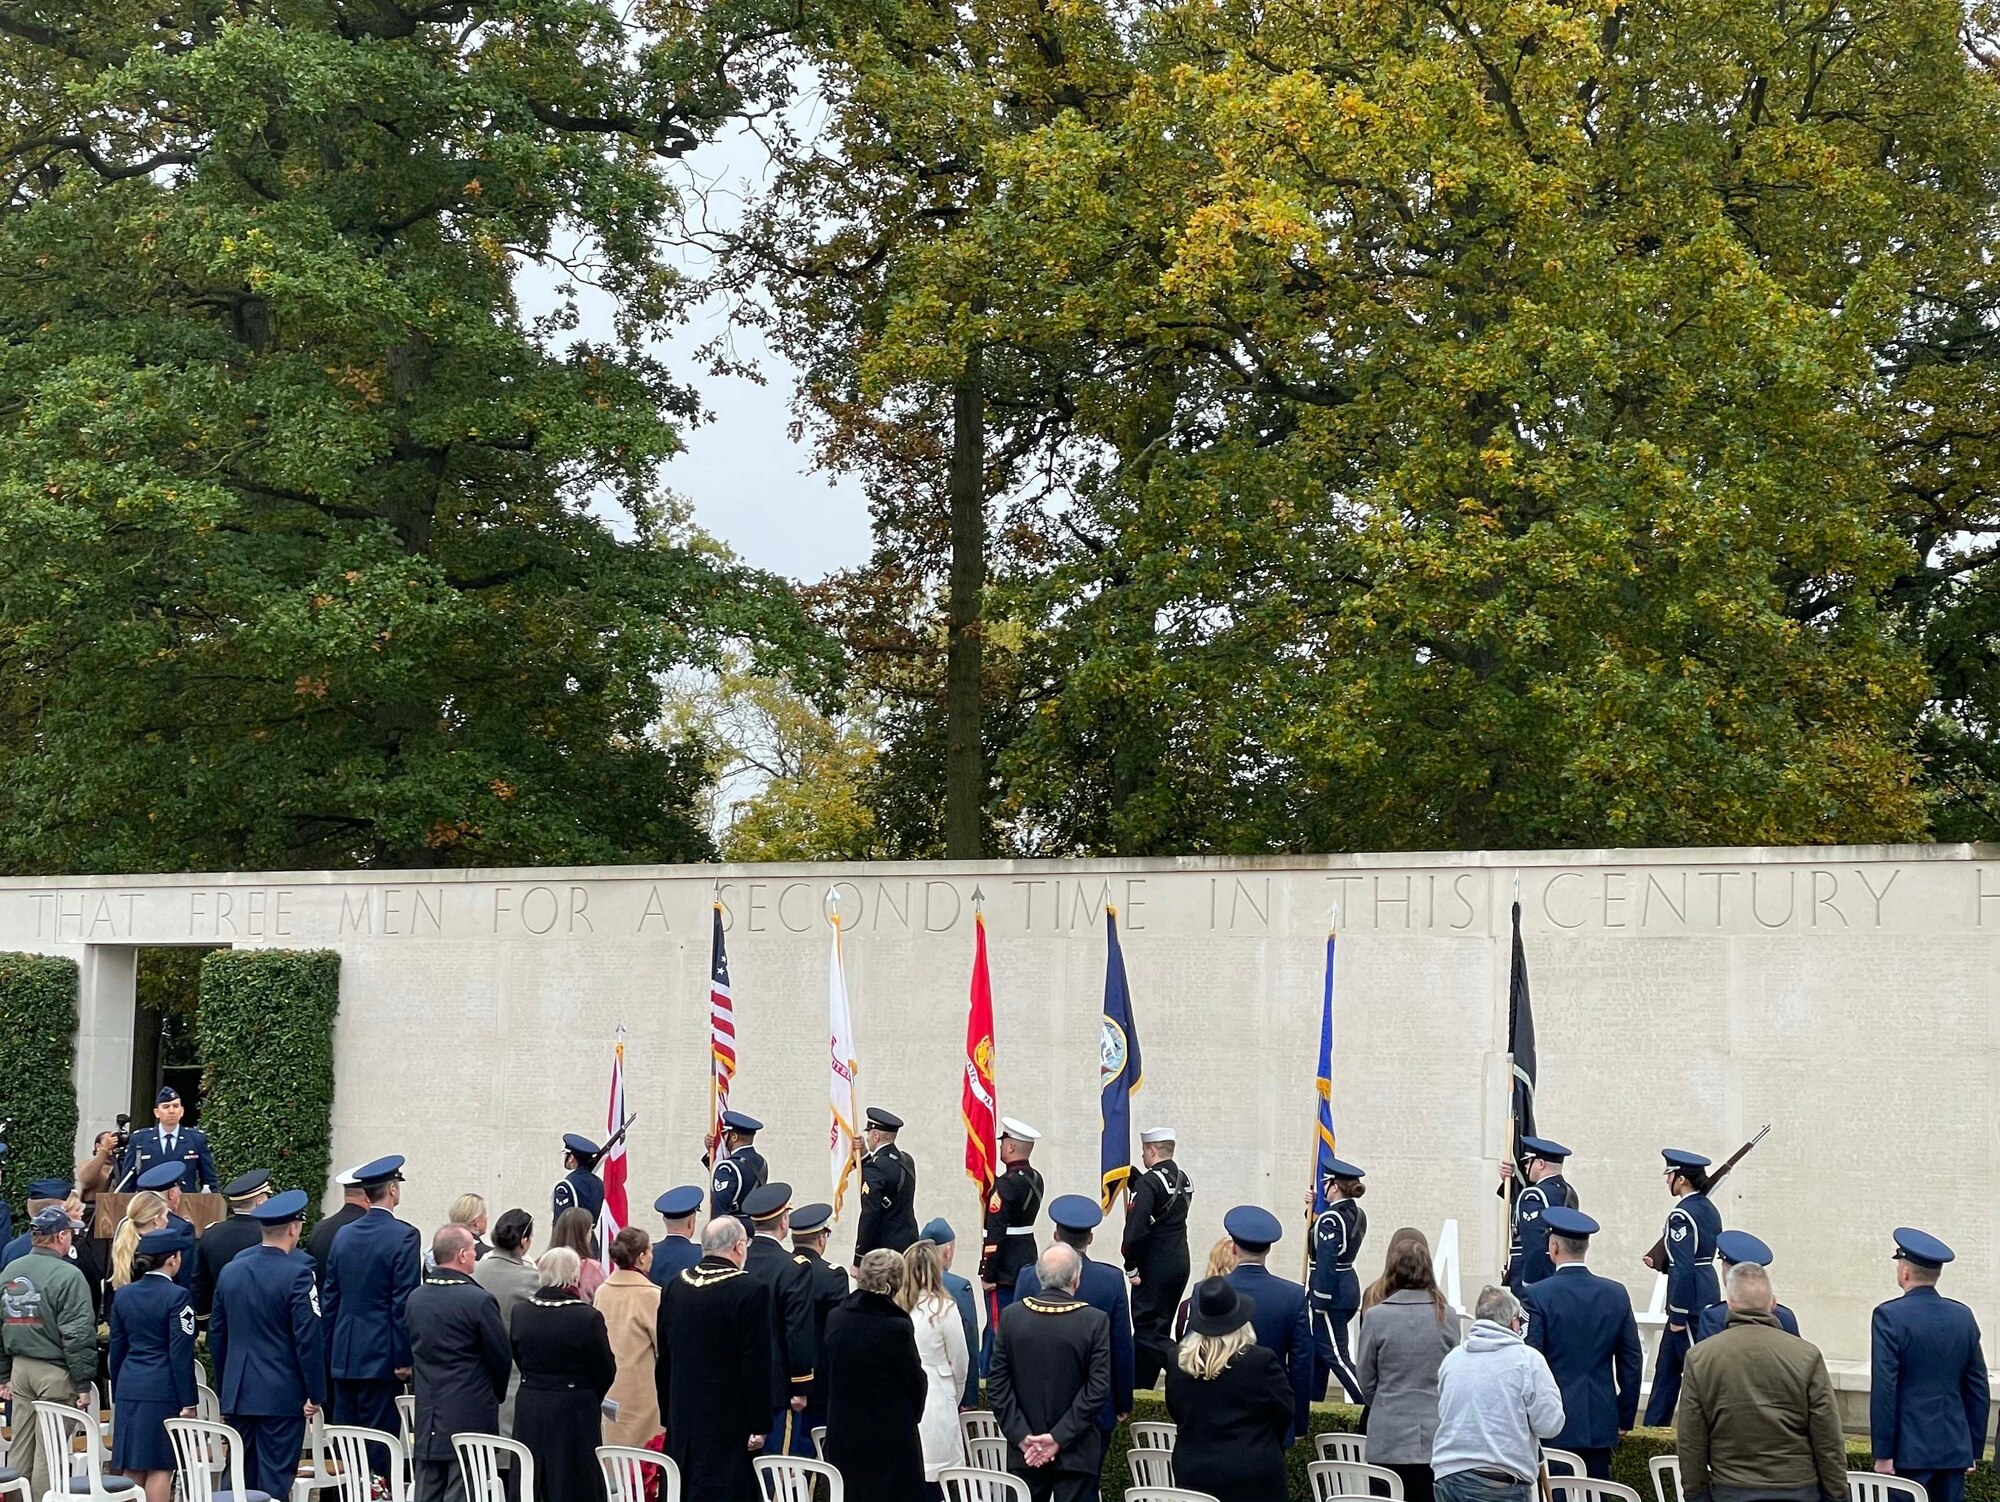 A group of U.S., Canada, and Royal Air Force servicemembers stand during a moment of silence to honor deceased military veterans, Cambridge, England, Nov. 11, 2021.Distinguished visitors and veterans were invited to participate in the ceremony by placing wreathes along the Tablets of the Missing. (U.S. Air Force photo by Senior Airman Joseph Barron).